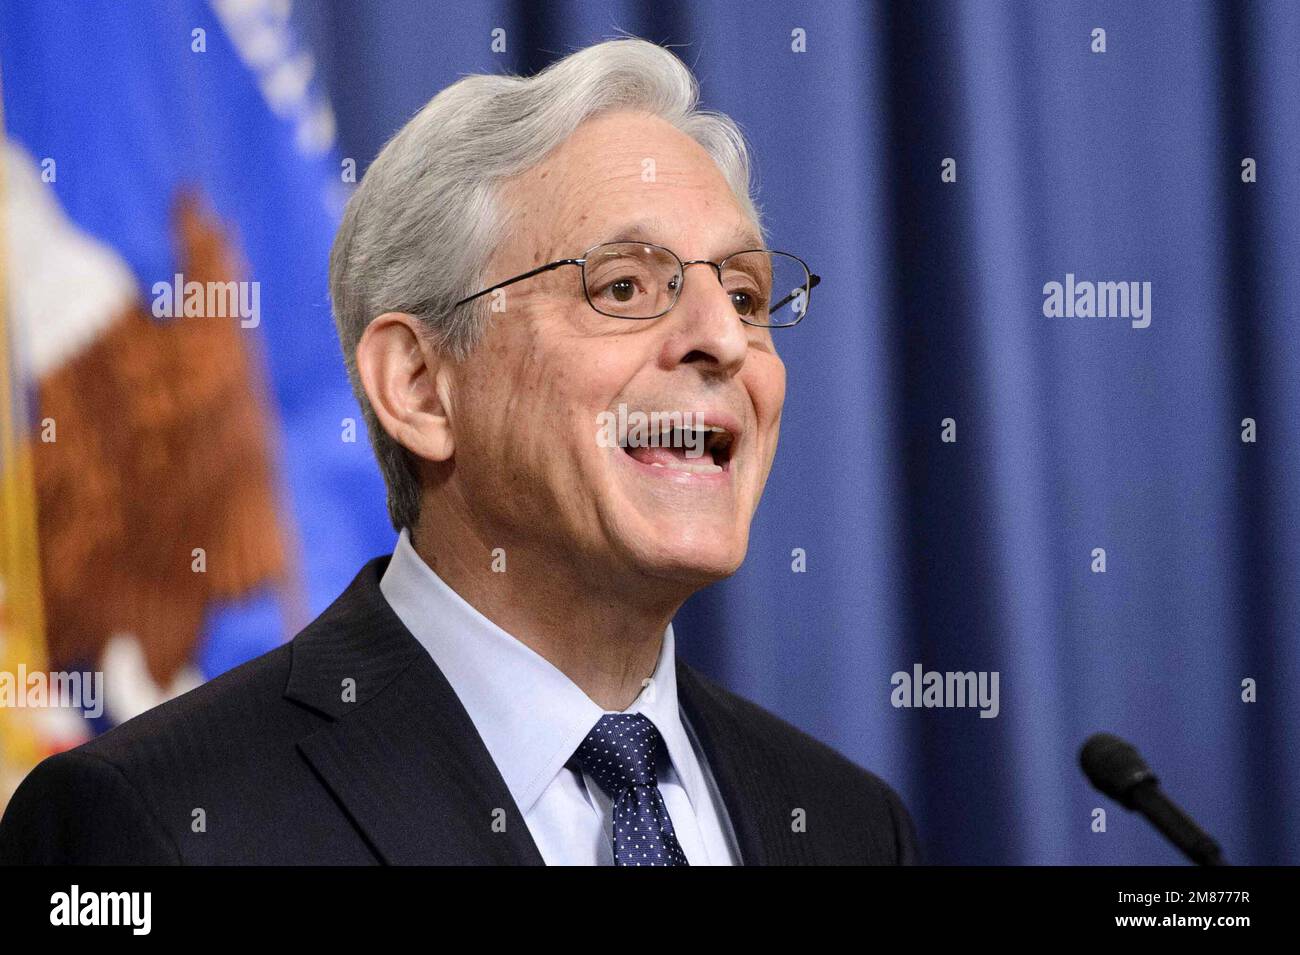 Washington, United States. 12th Jan, 2023. Attorney General Merrick Garland is joined by U.S. Attorney for the Northern District of Illinois John Lausch for a press conference at the Department of Justice in Washington, DC on Thursday, January 12, 2023 to announce the appointment of U.S. Attorney for the District of Maryland Robert Hurr as Special Counsel to investigate the discovery of classified documents held by President Joe Biden at his home office. Photo by Bonnie Cash/UPI Credit: UPI/Alamy Live News Stock Photo